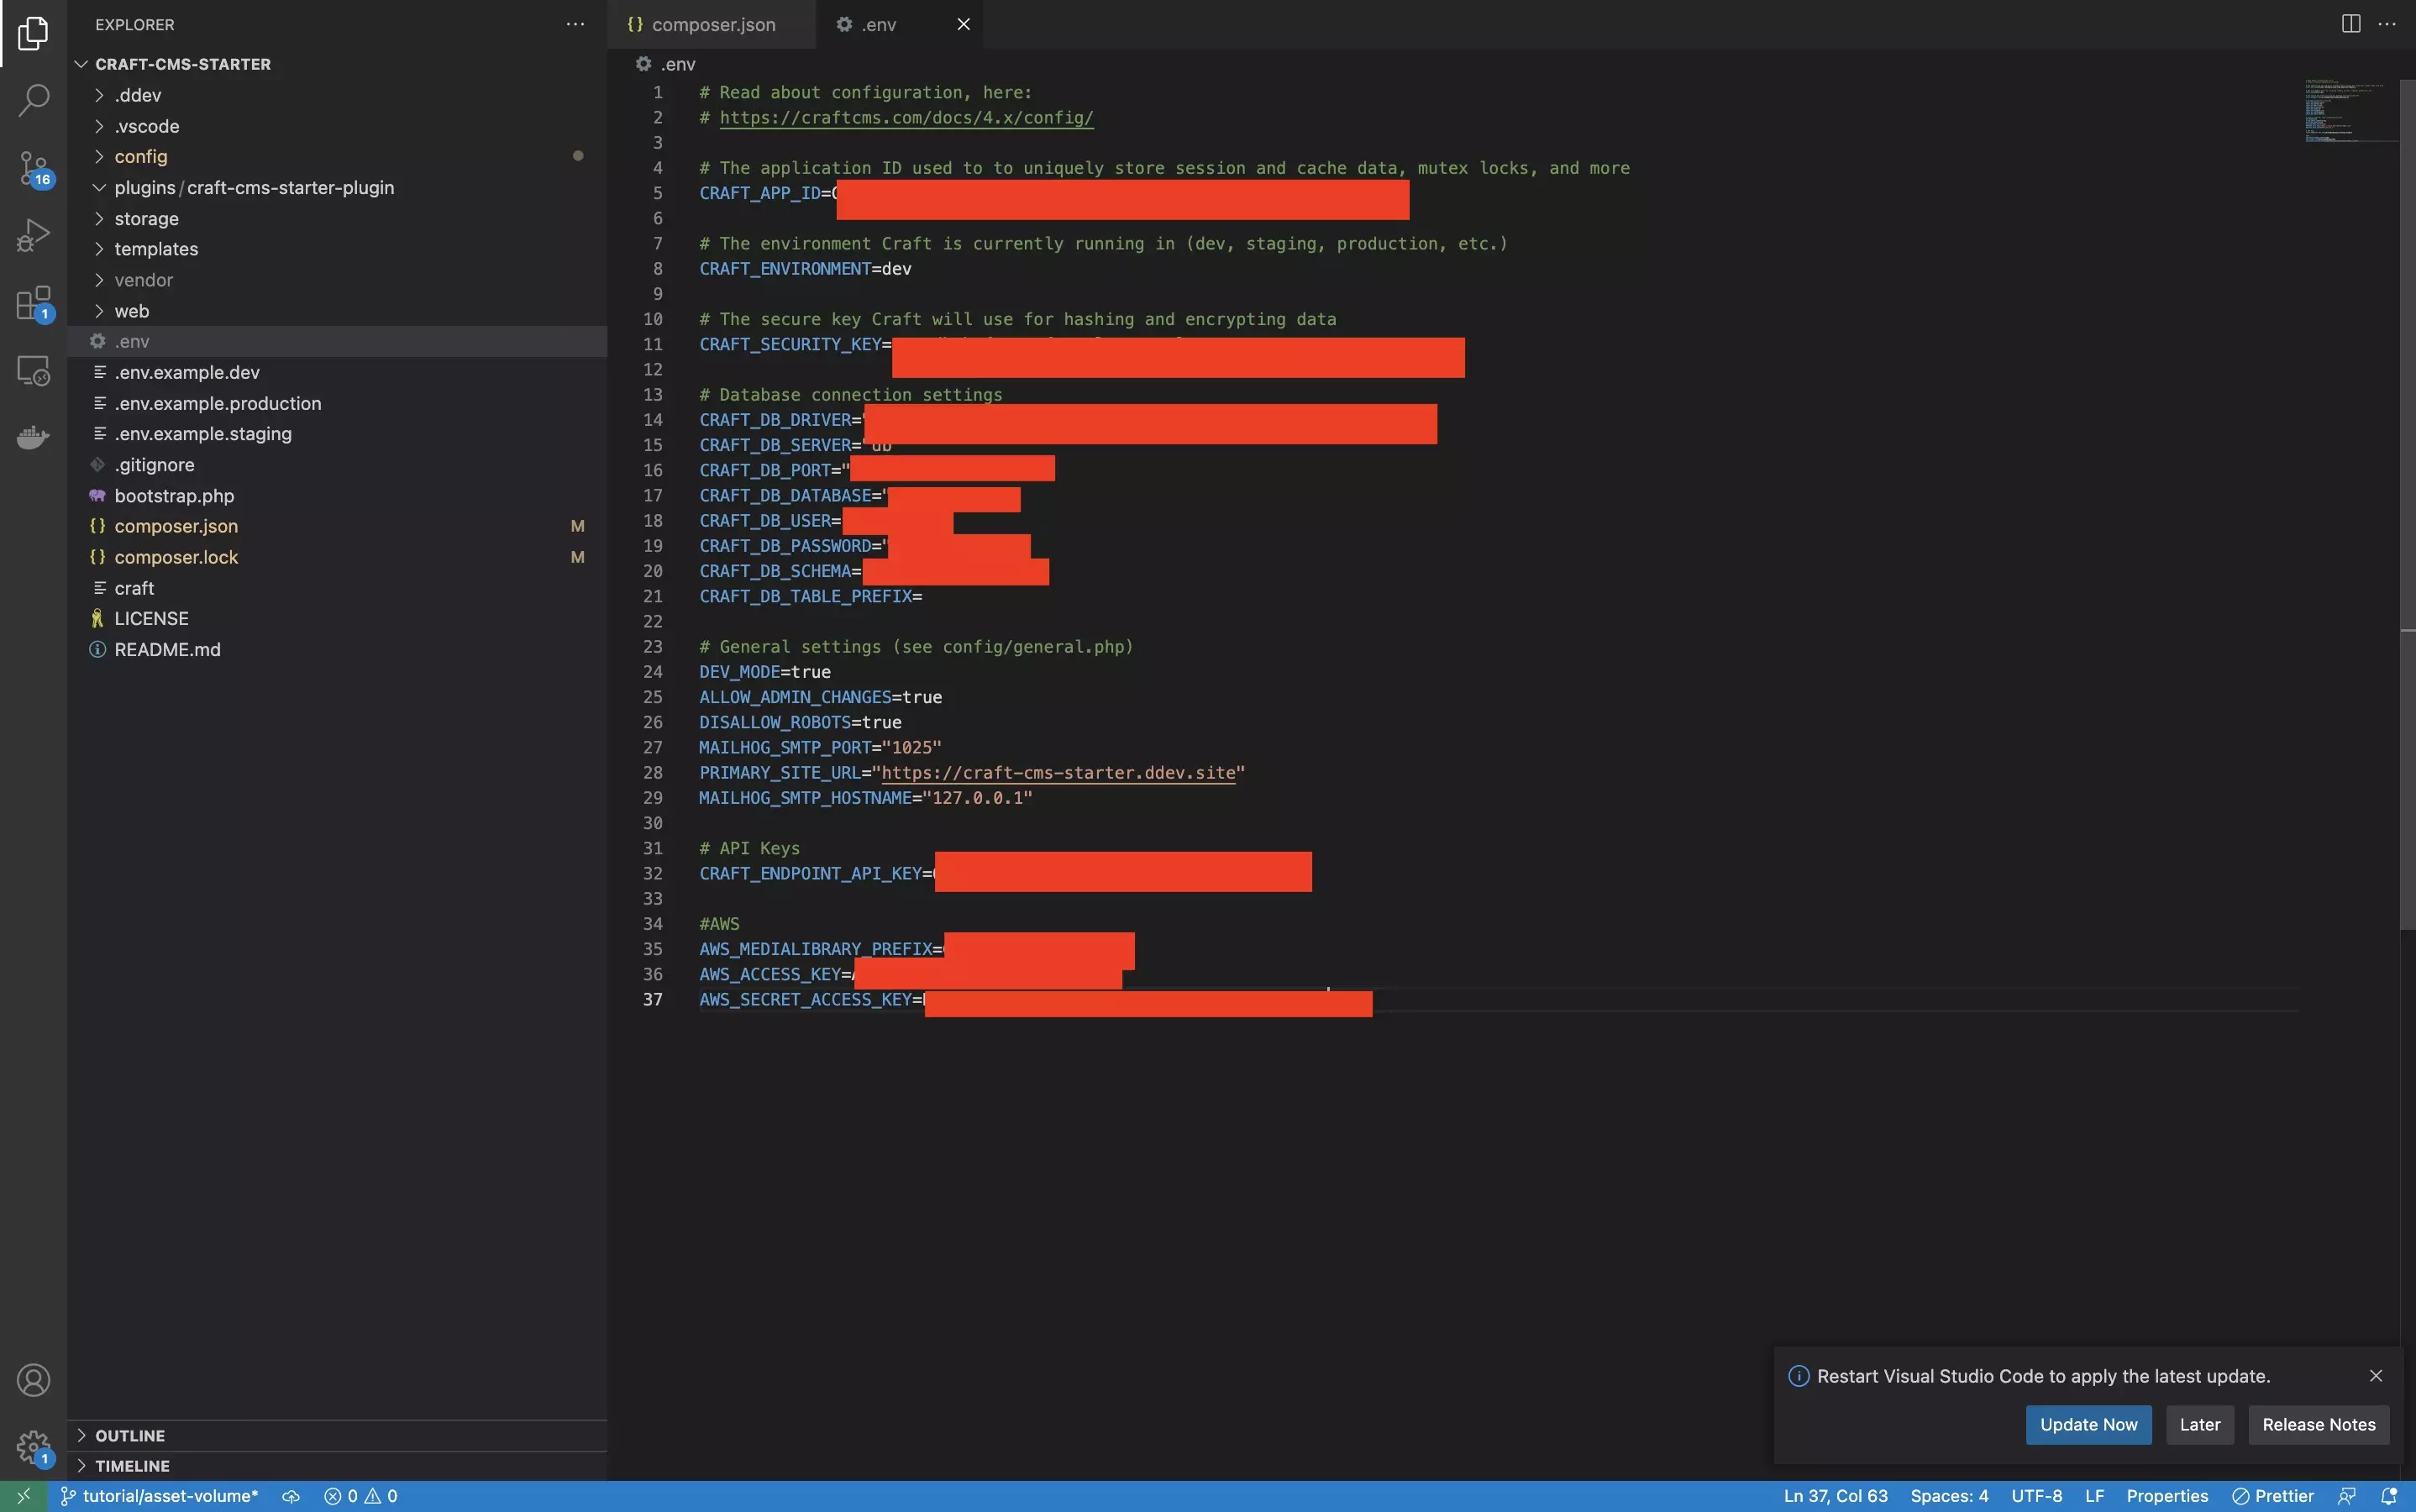 A screenshot of VSCode showing the .env file of the Craft CMS.